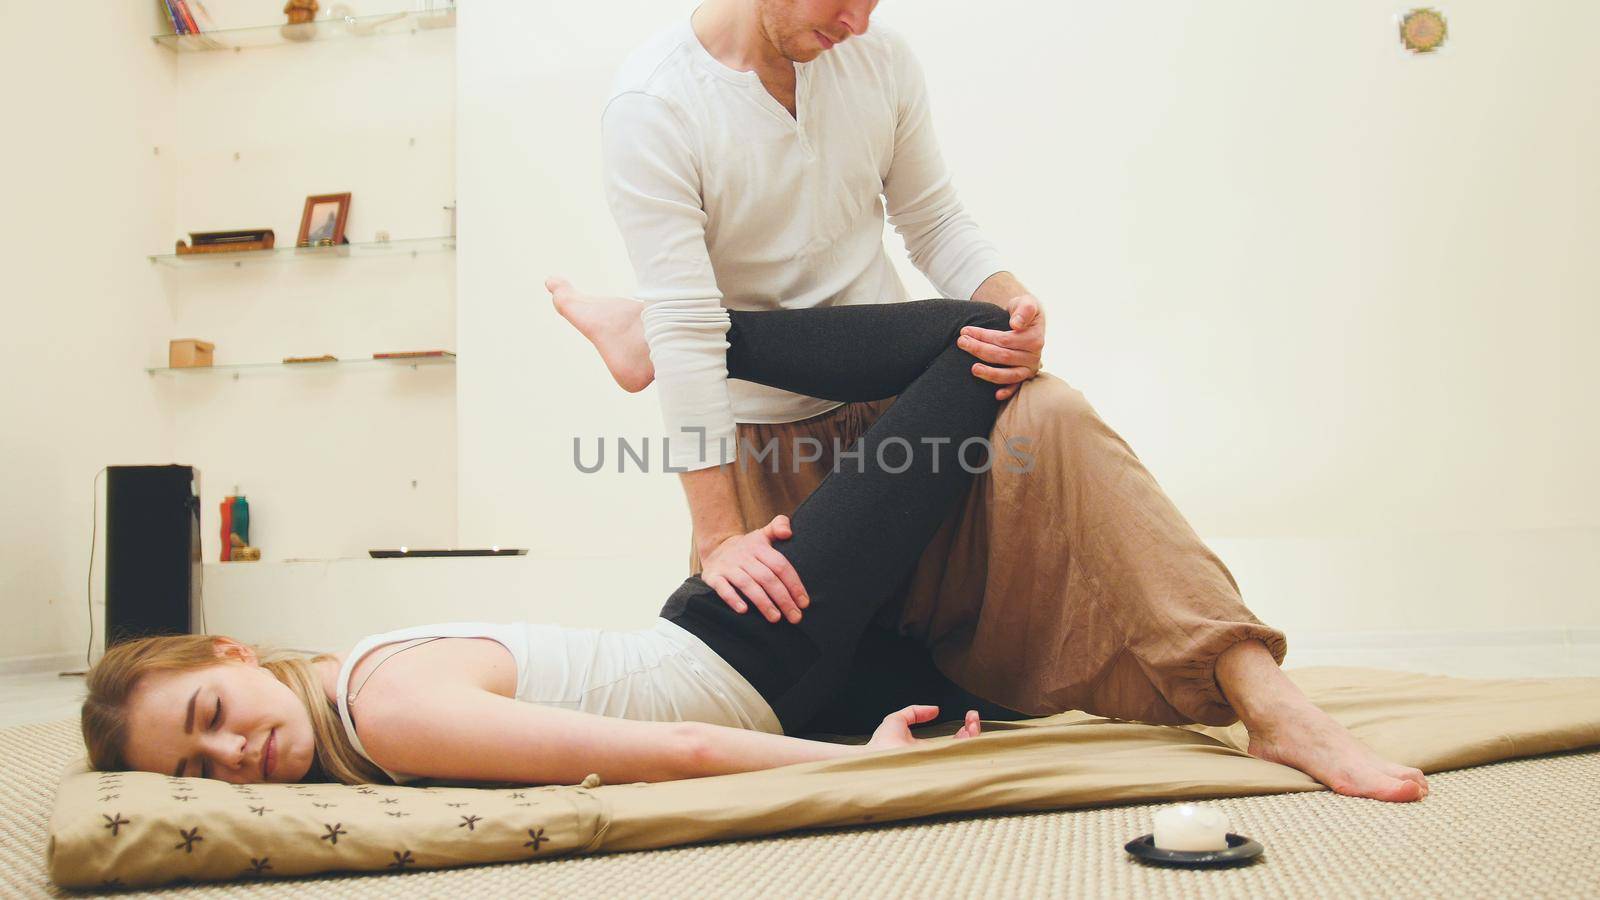 Thai traditional therapy for the spine and legs - shocking strong massage by Studia72